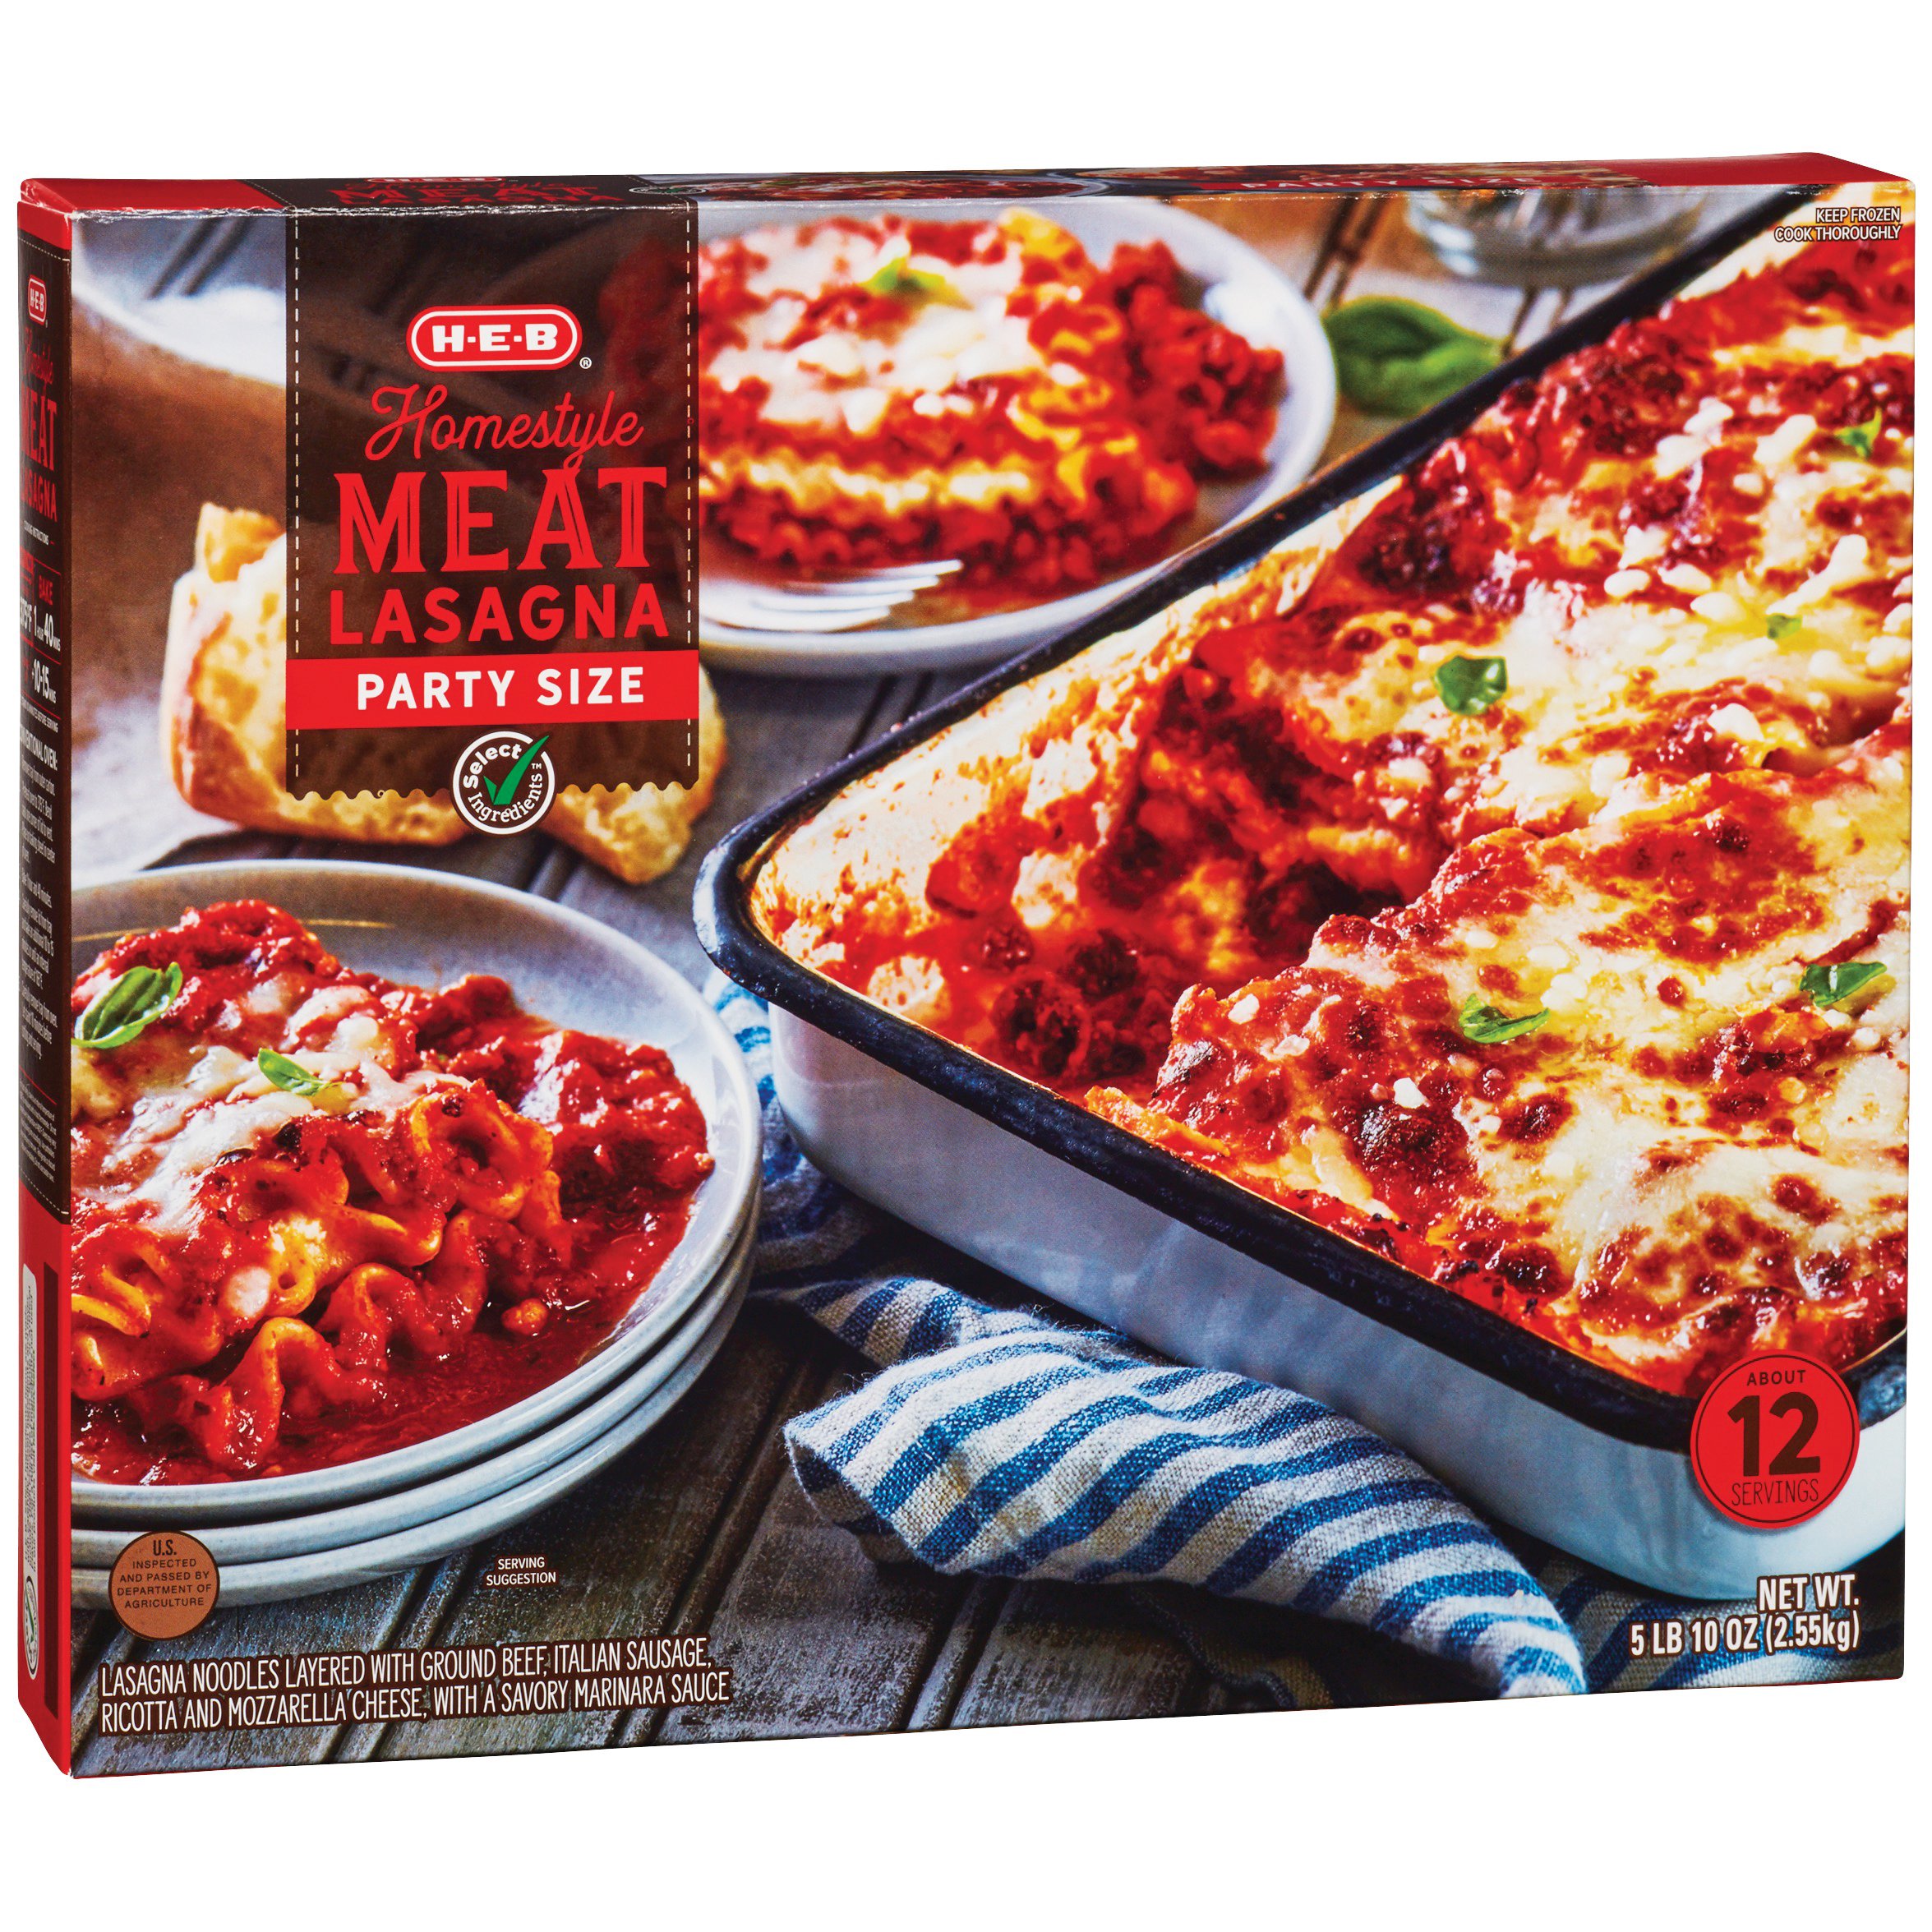 H E B Select Ingredients Homestyle Meat Lasagna Party Size Shop